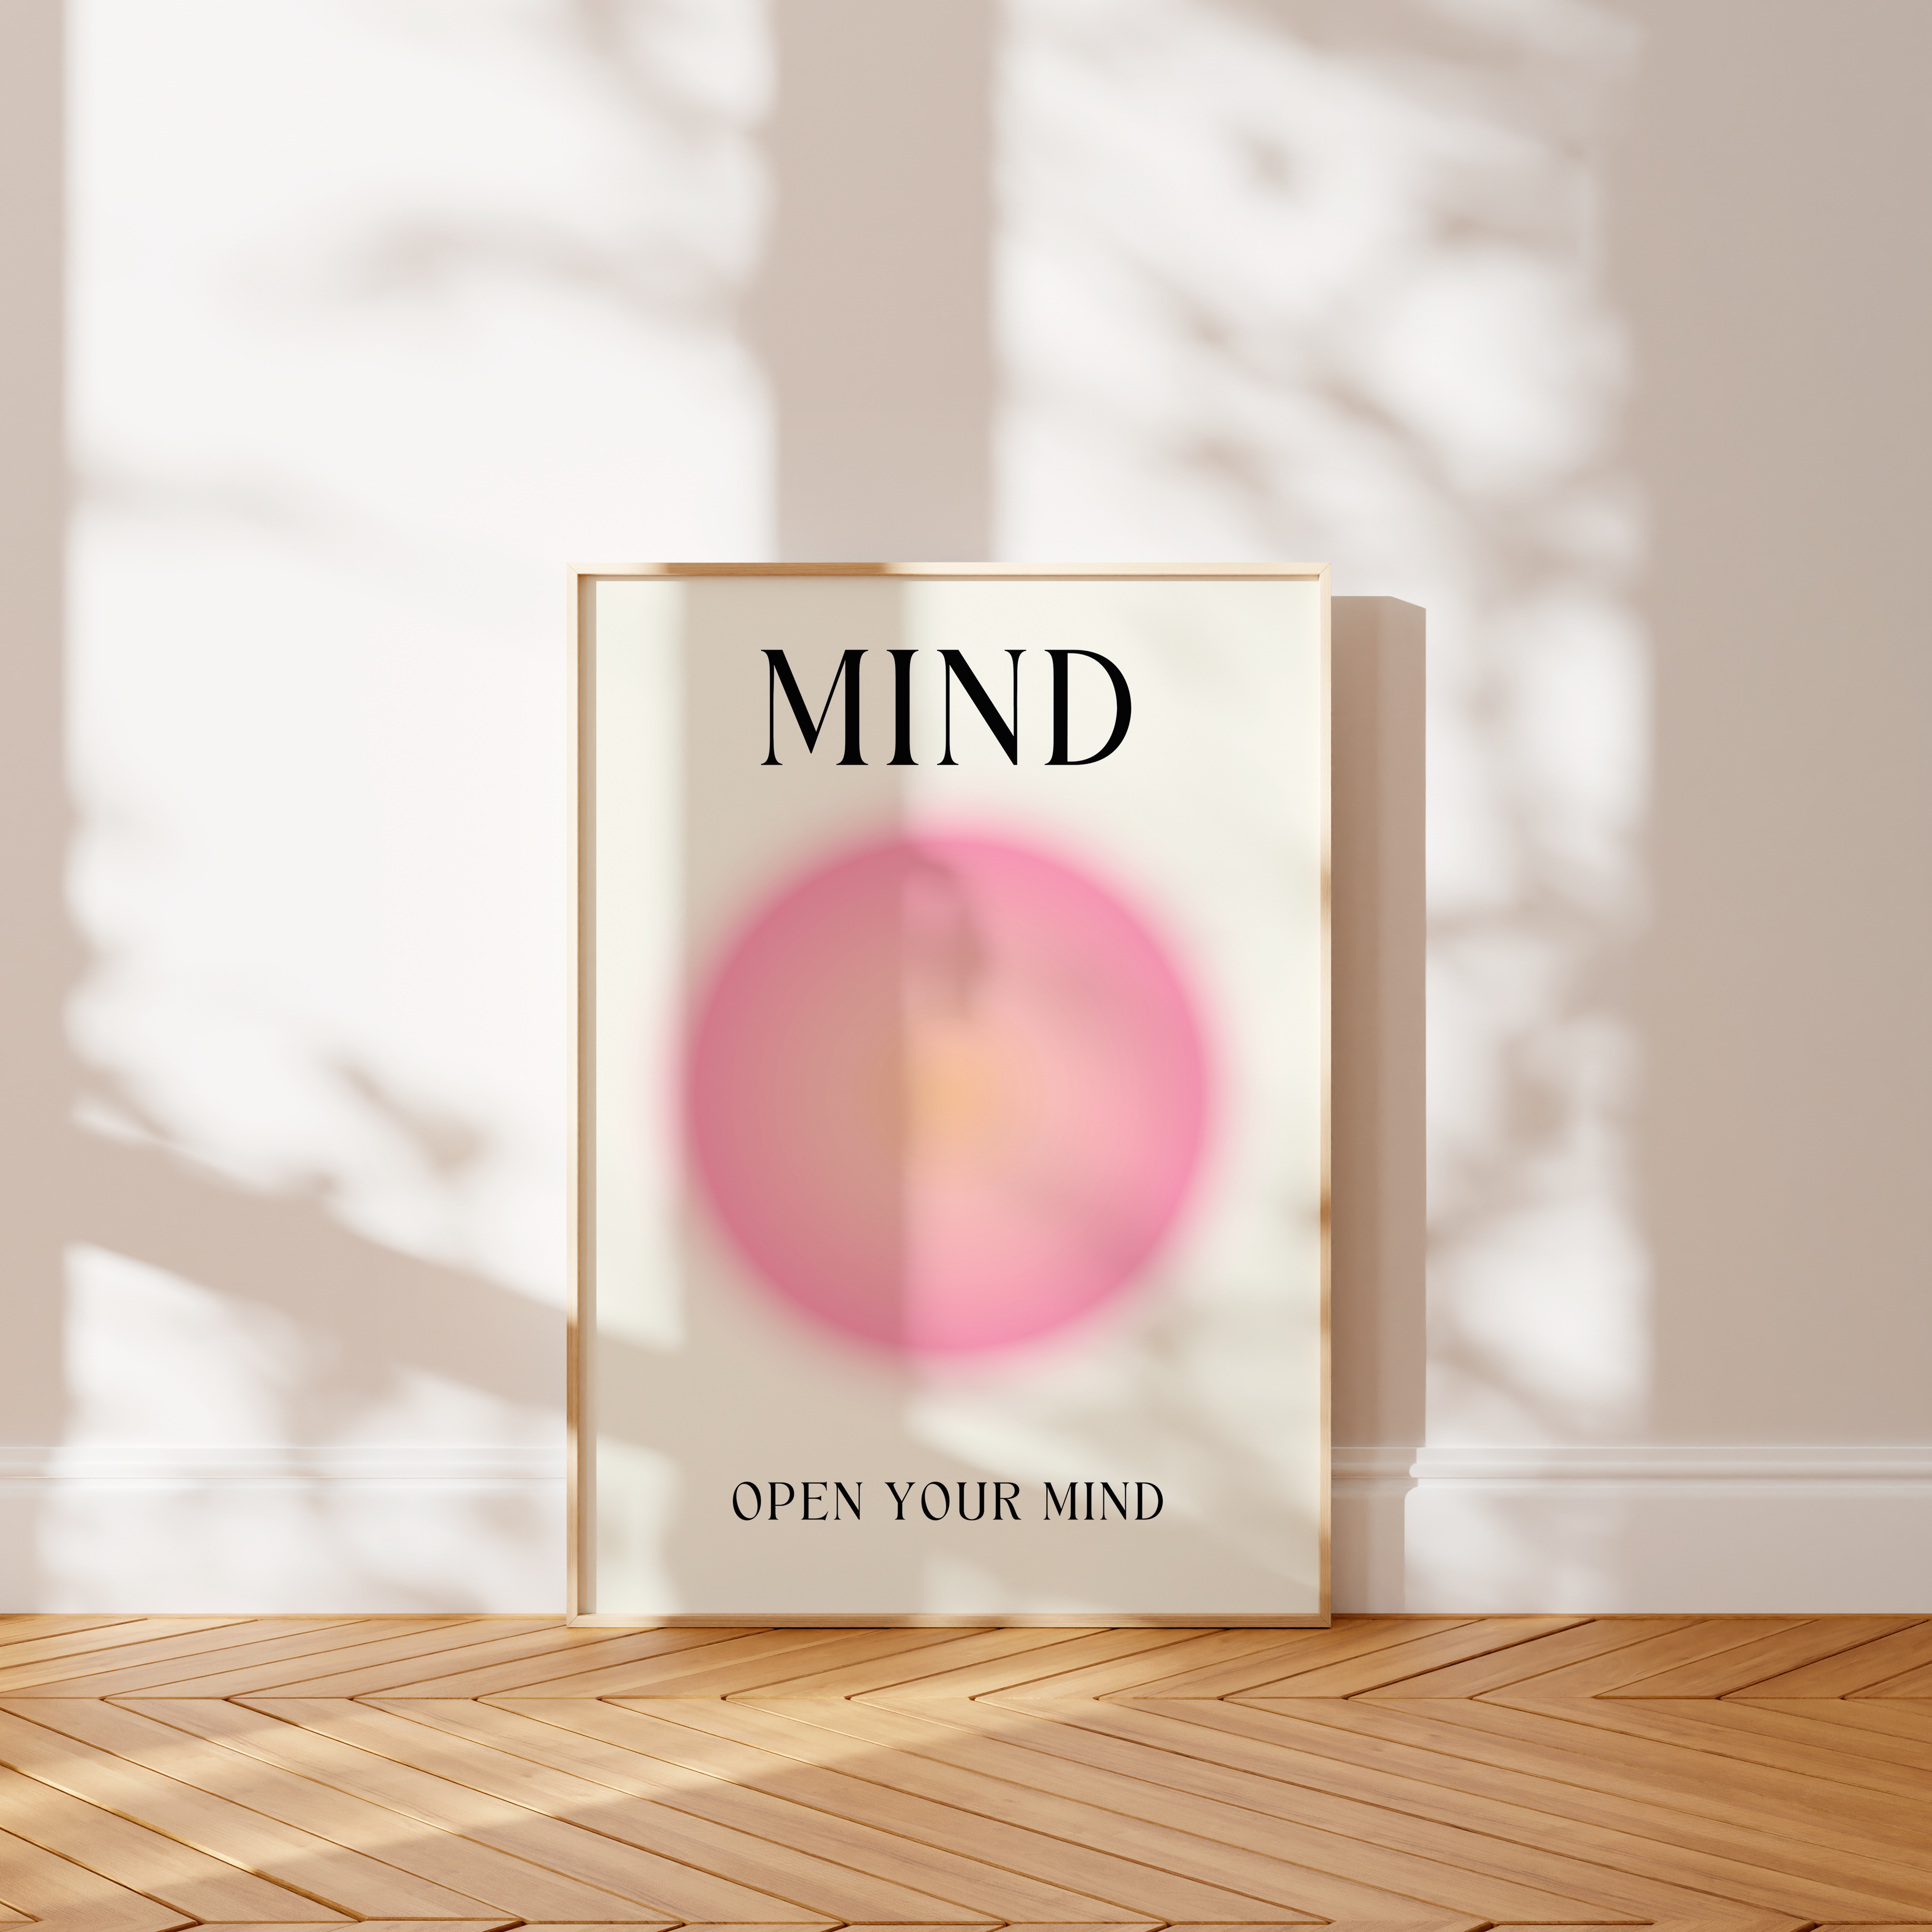 Mind- open your mind